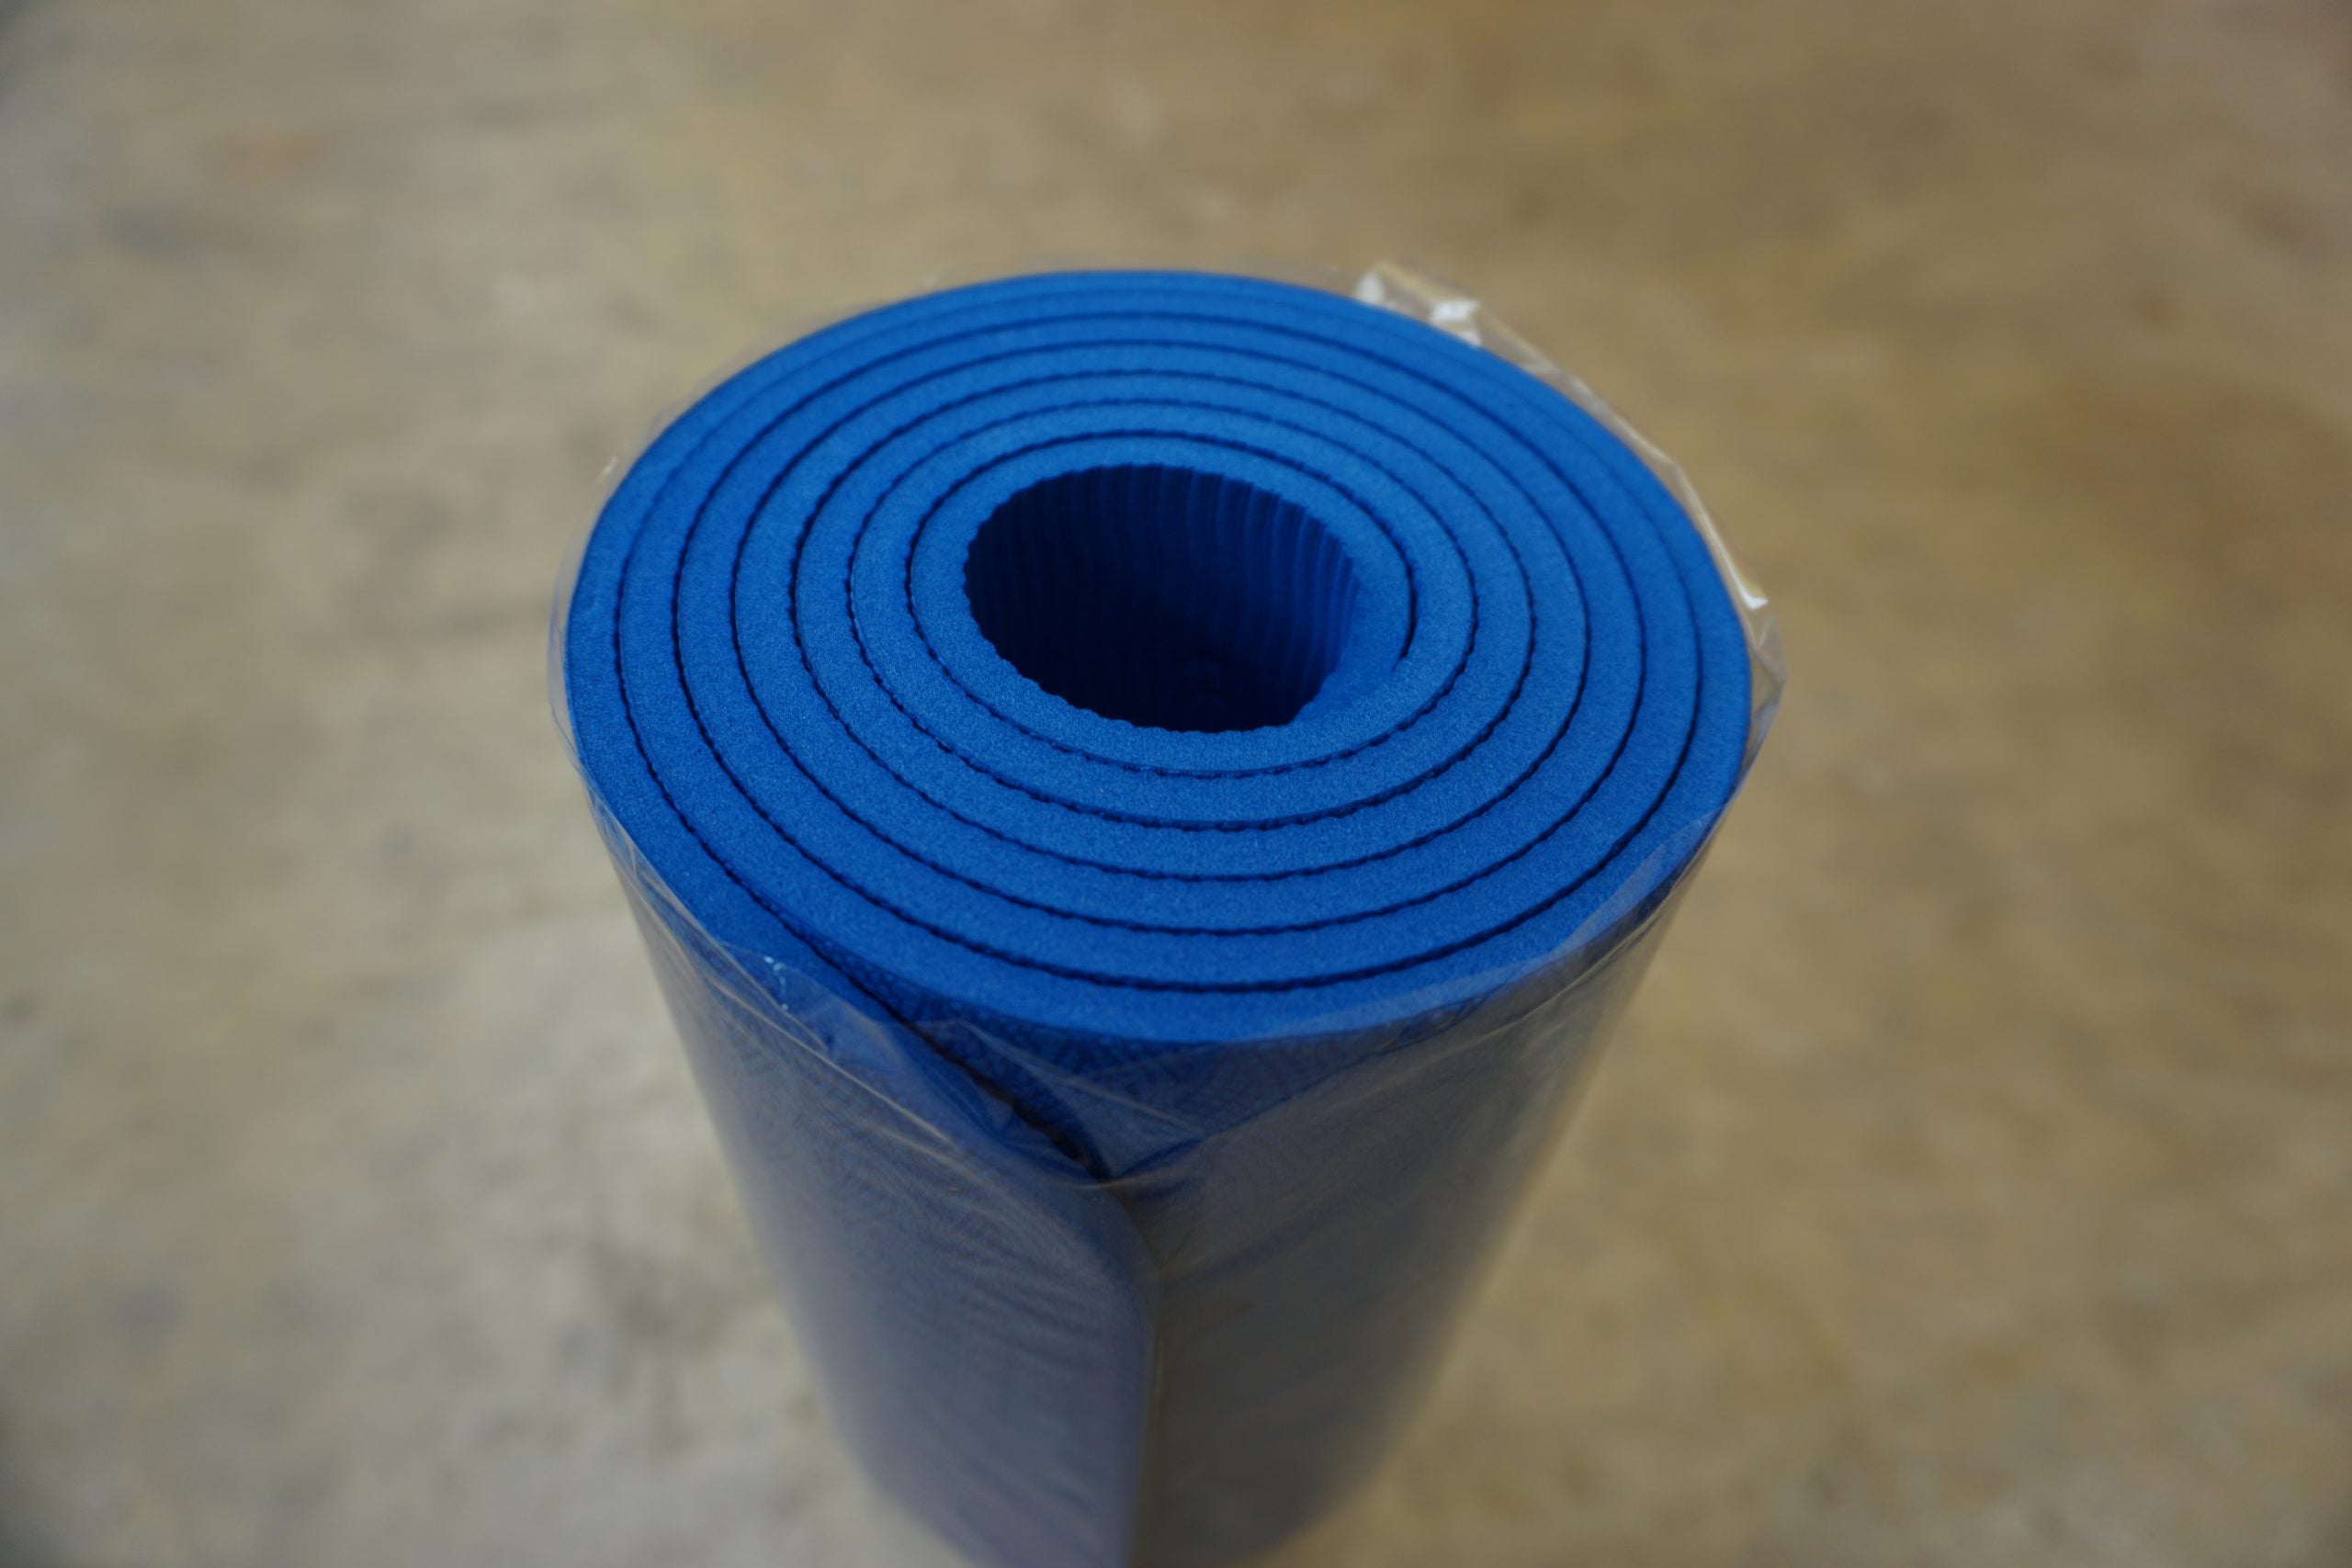 Non Slip Yoga Mat With Alignment, 6mm Thick, Eco TPE, Royal Blue